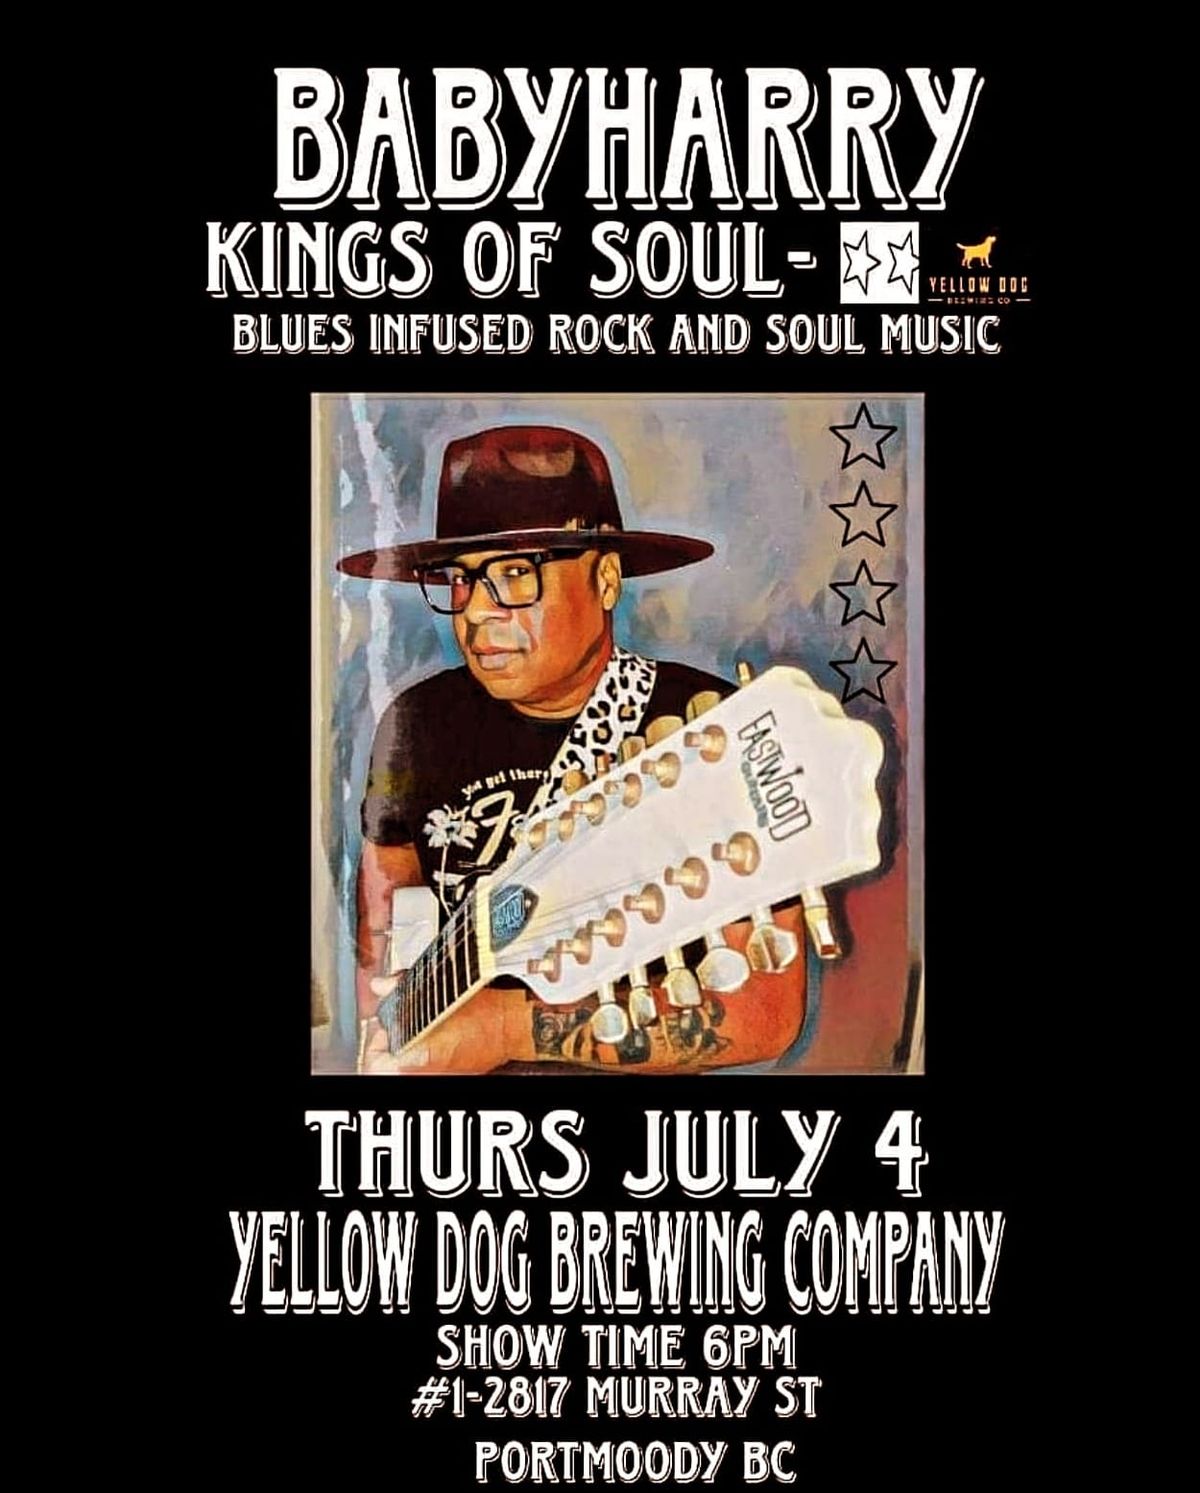 Thurs July 4th 6pm @ YELLOW DOG BREWING COMPANY\/Babyharry Kings of soul 2817 Murray st Portmoody bc 